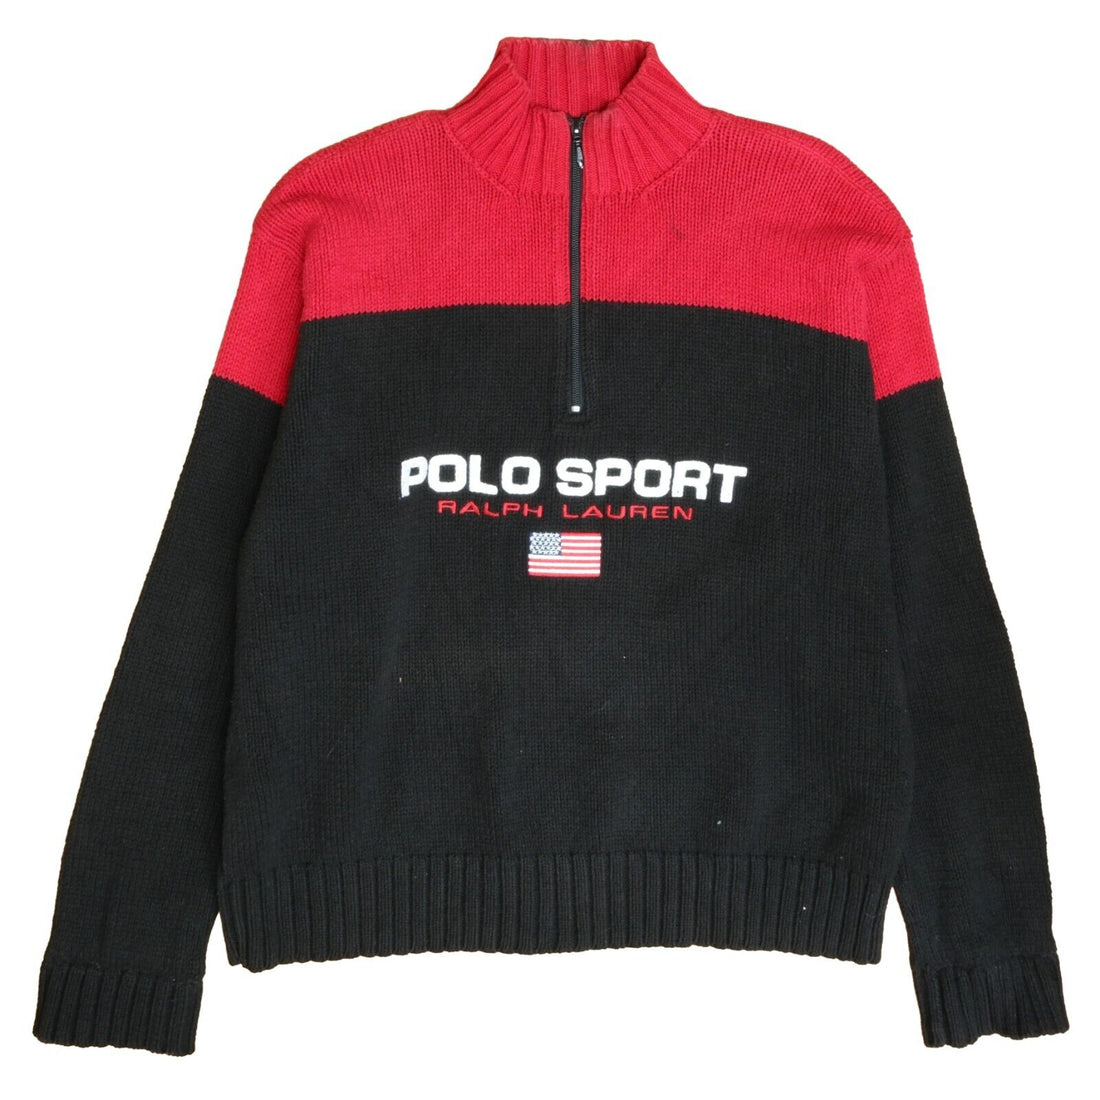 Vintage Polo Sport Ralph Lauren 1/4 Zip Knit Pullover Sweater Size Large